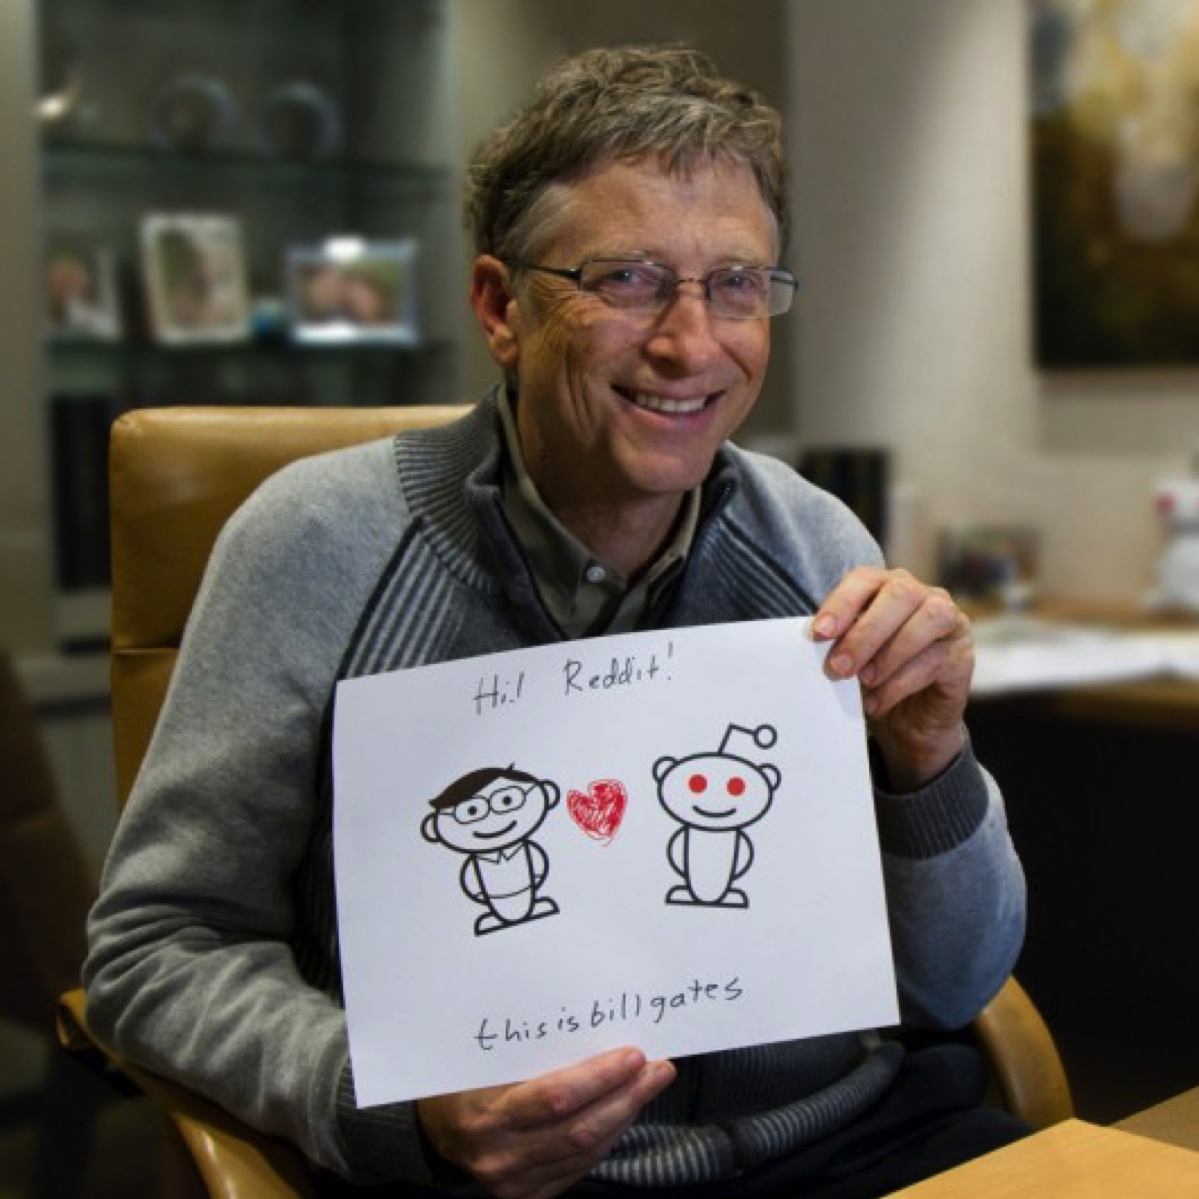 Here are Bill Gates' favorite TV shows, according to his Reddit AMA